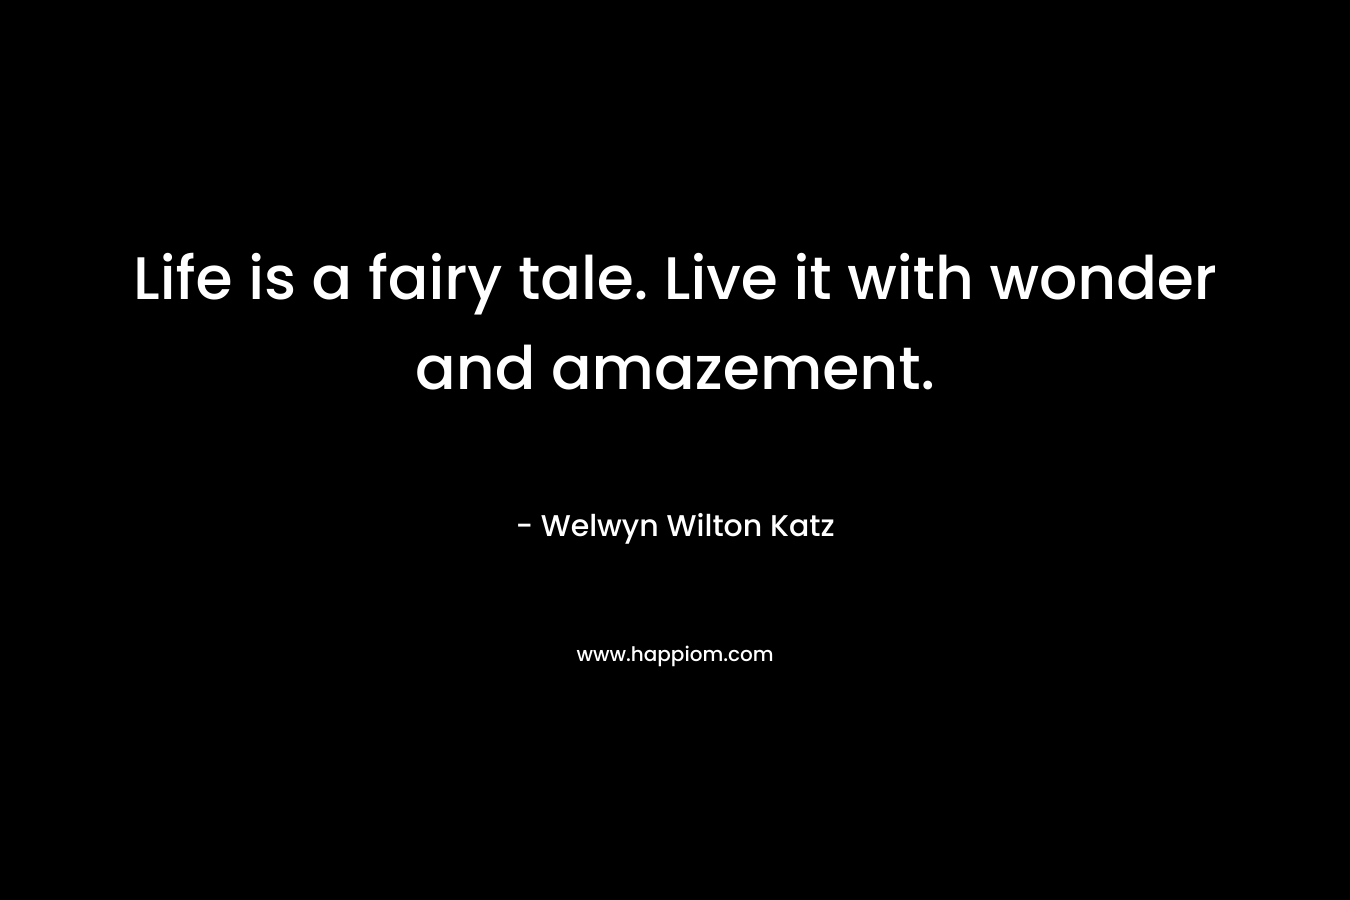 Life is a fairy tale. Live it with wonder and amazement. – Welwyn Wilton Katz